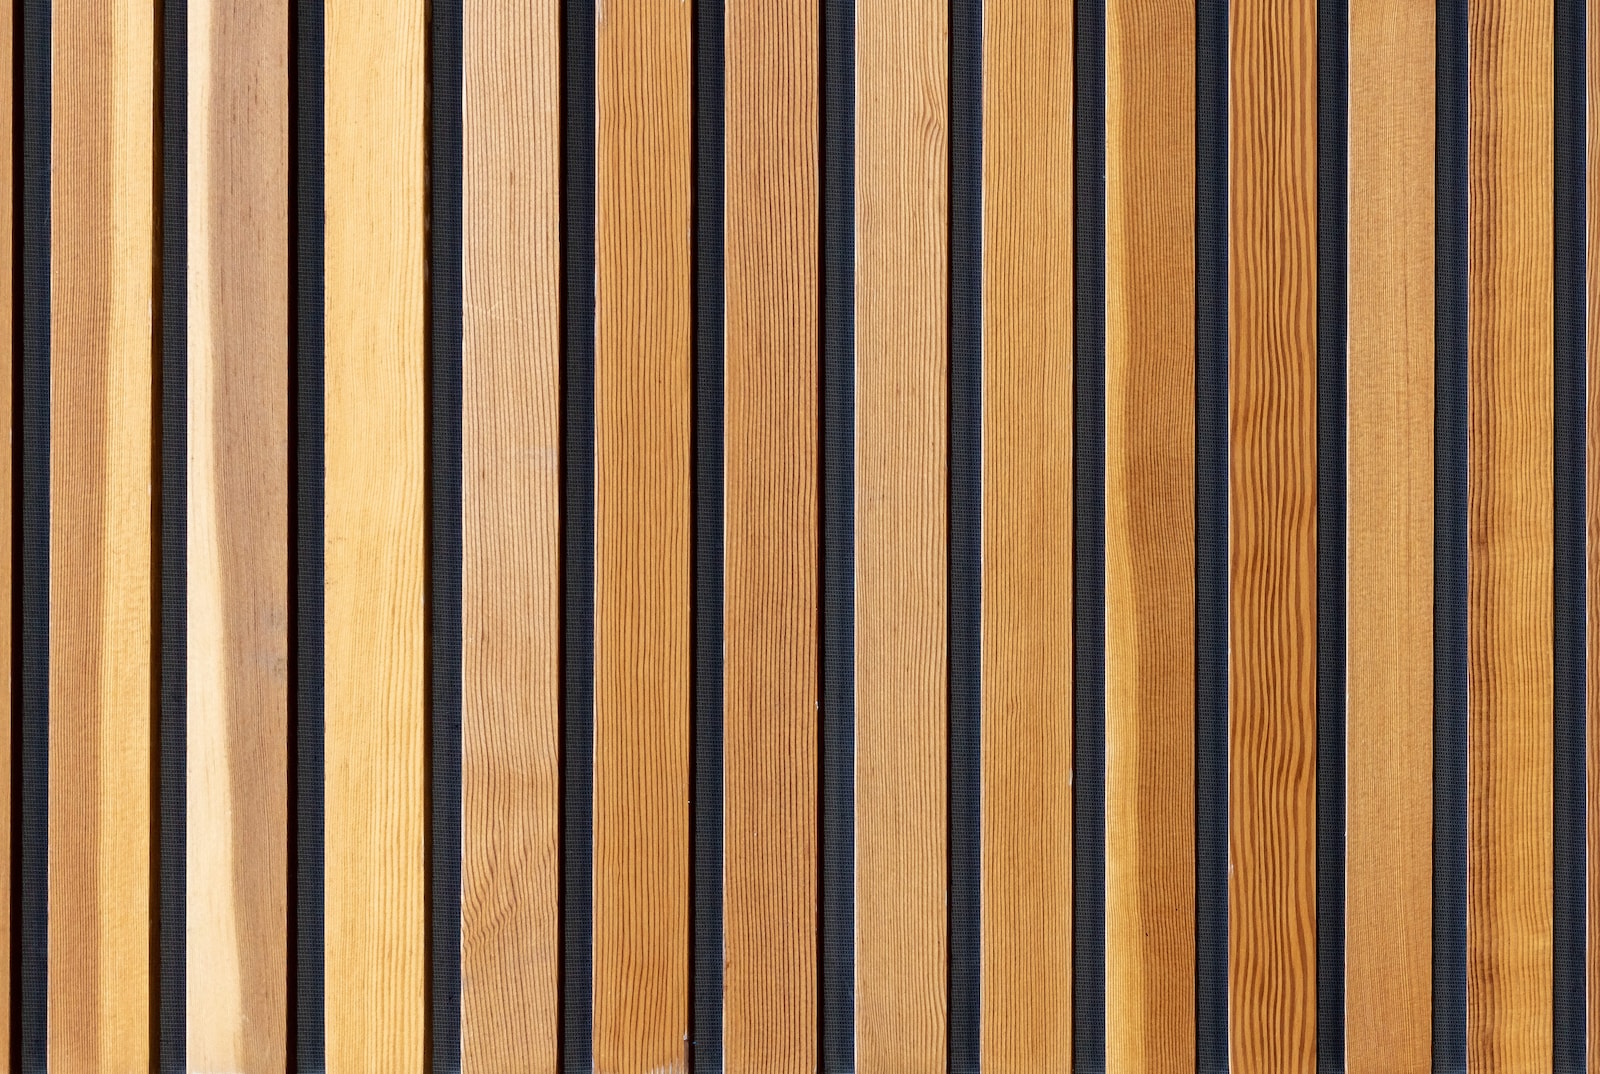 Step-by-Step Guide: How to Install Wood Wall Paneling